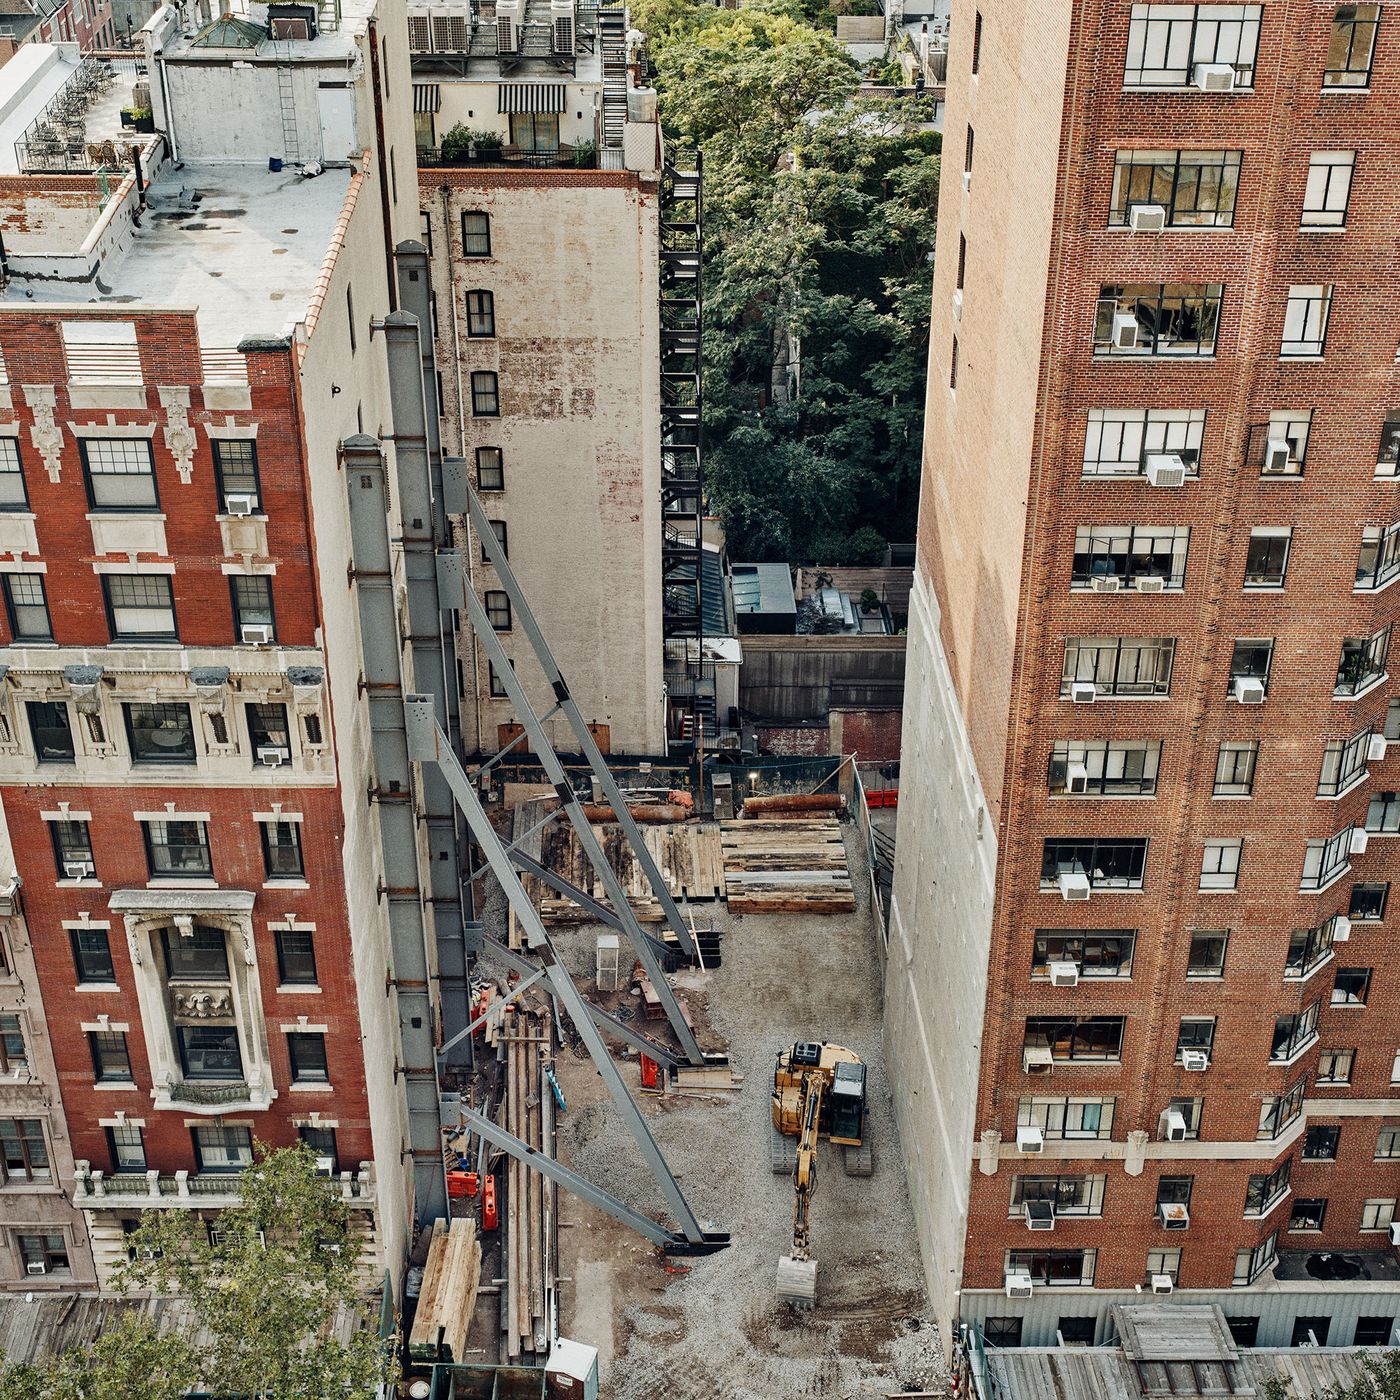 Fifth Avenue Construction Is a Nightmare for the Neighbors